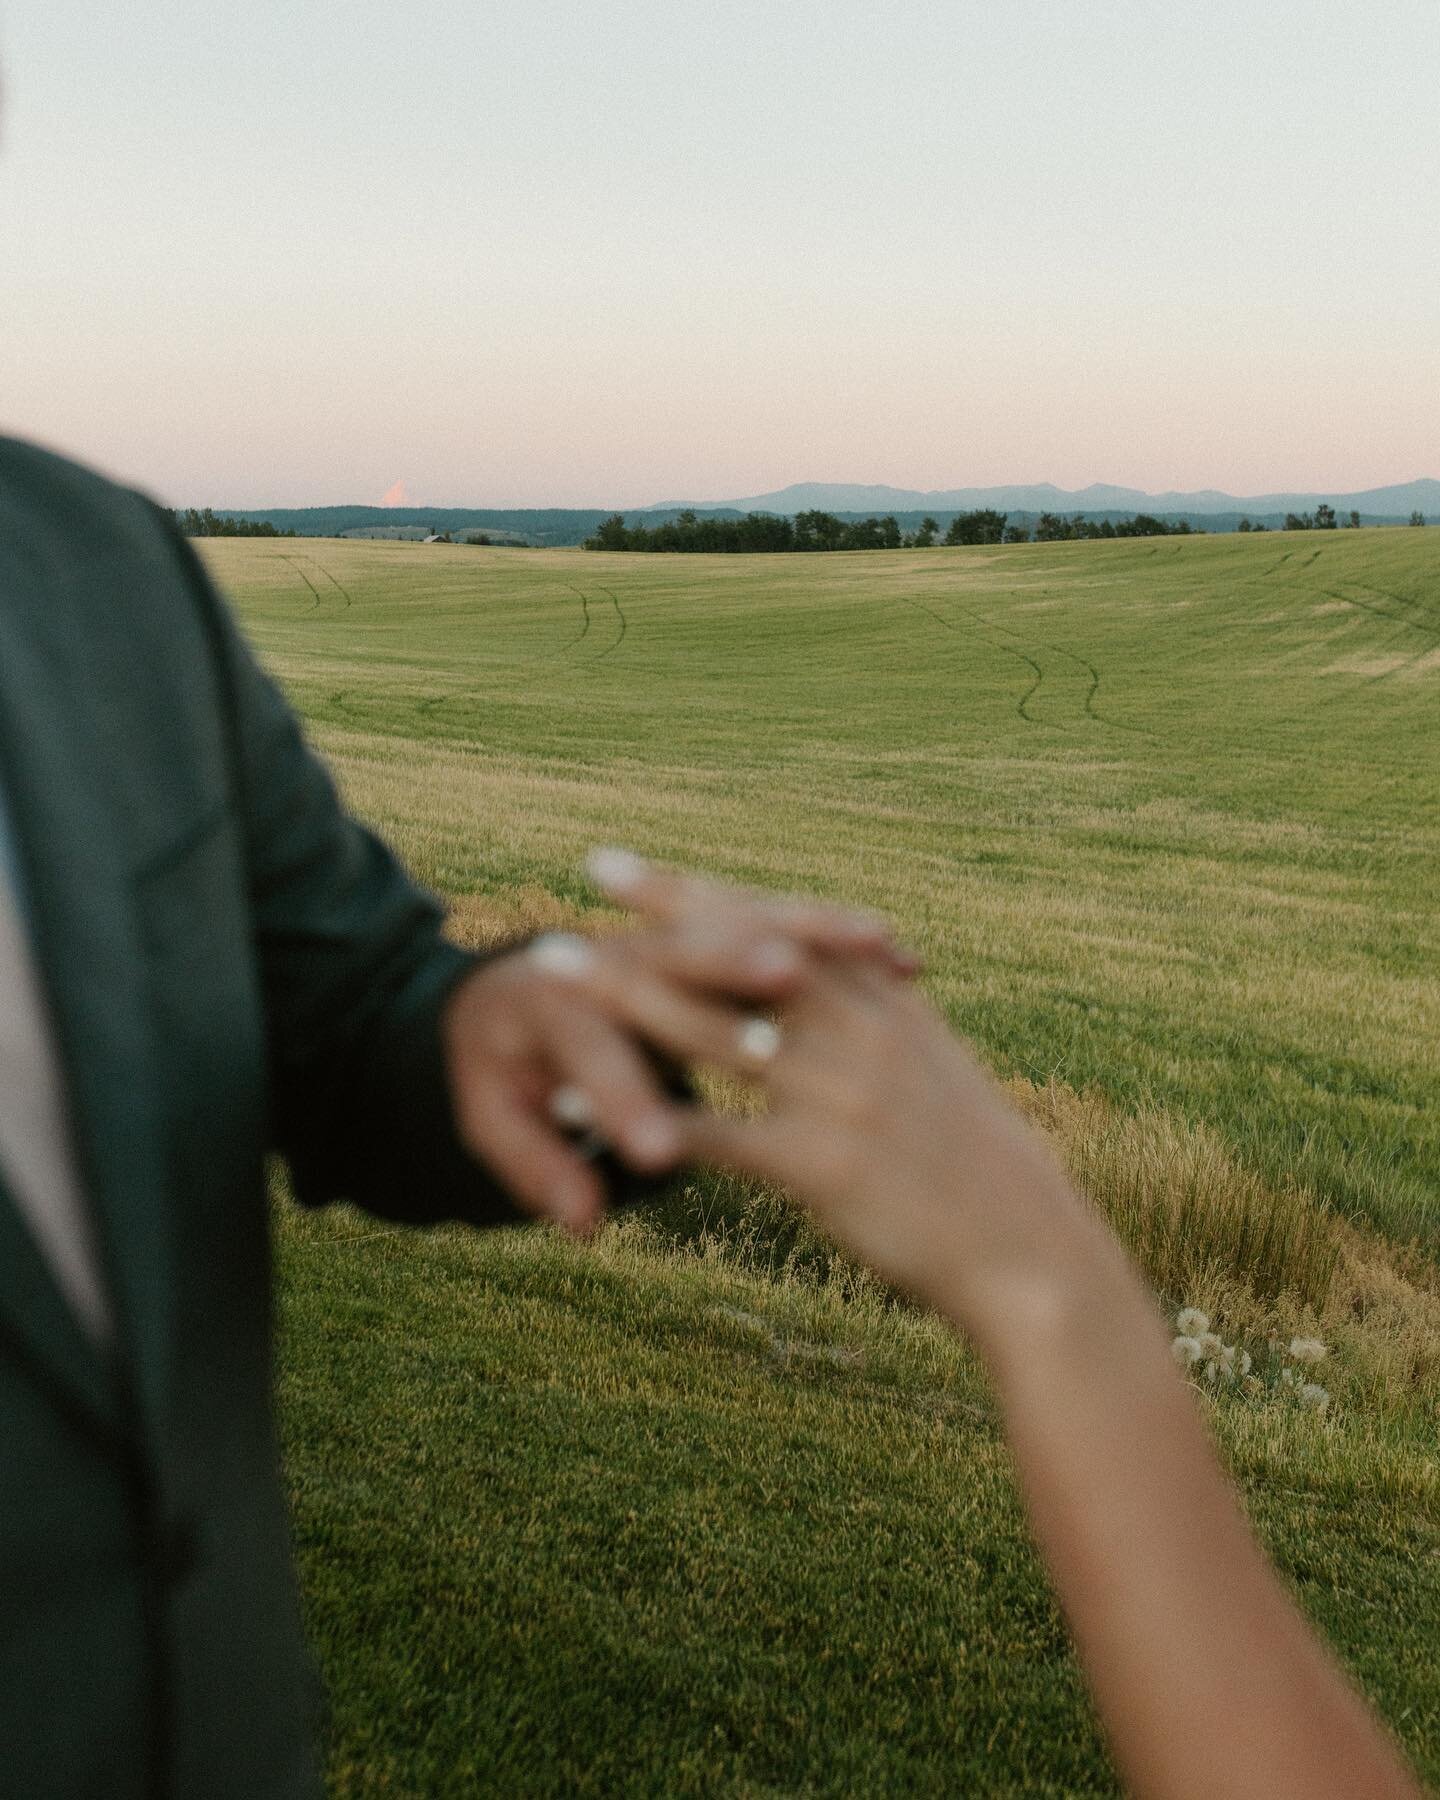 sneaking away for sunset photos is one of my favorite parts of a wedding day&mdash;especially when it involves green rolling hills and a glowing sky over the tetons in the distance ✨